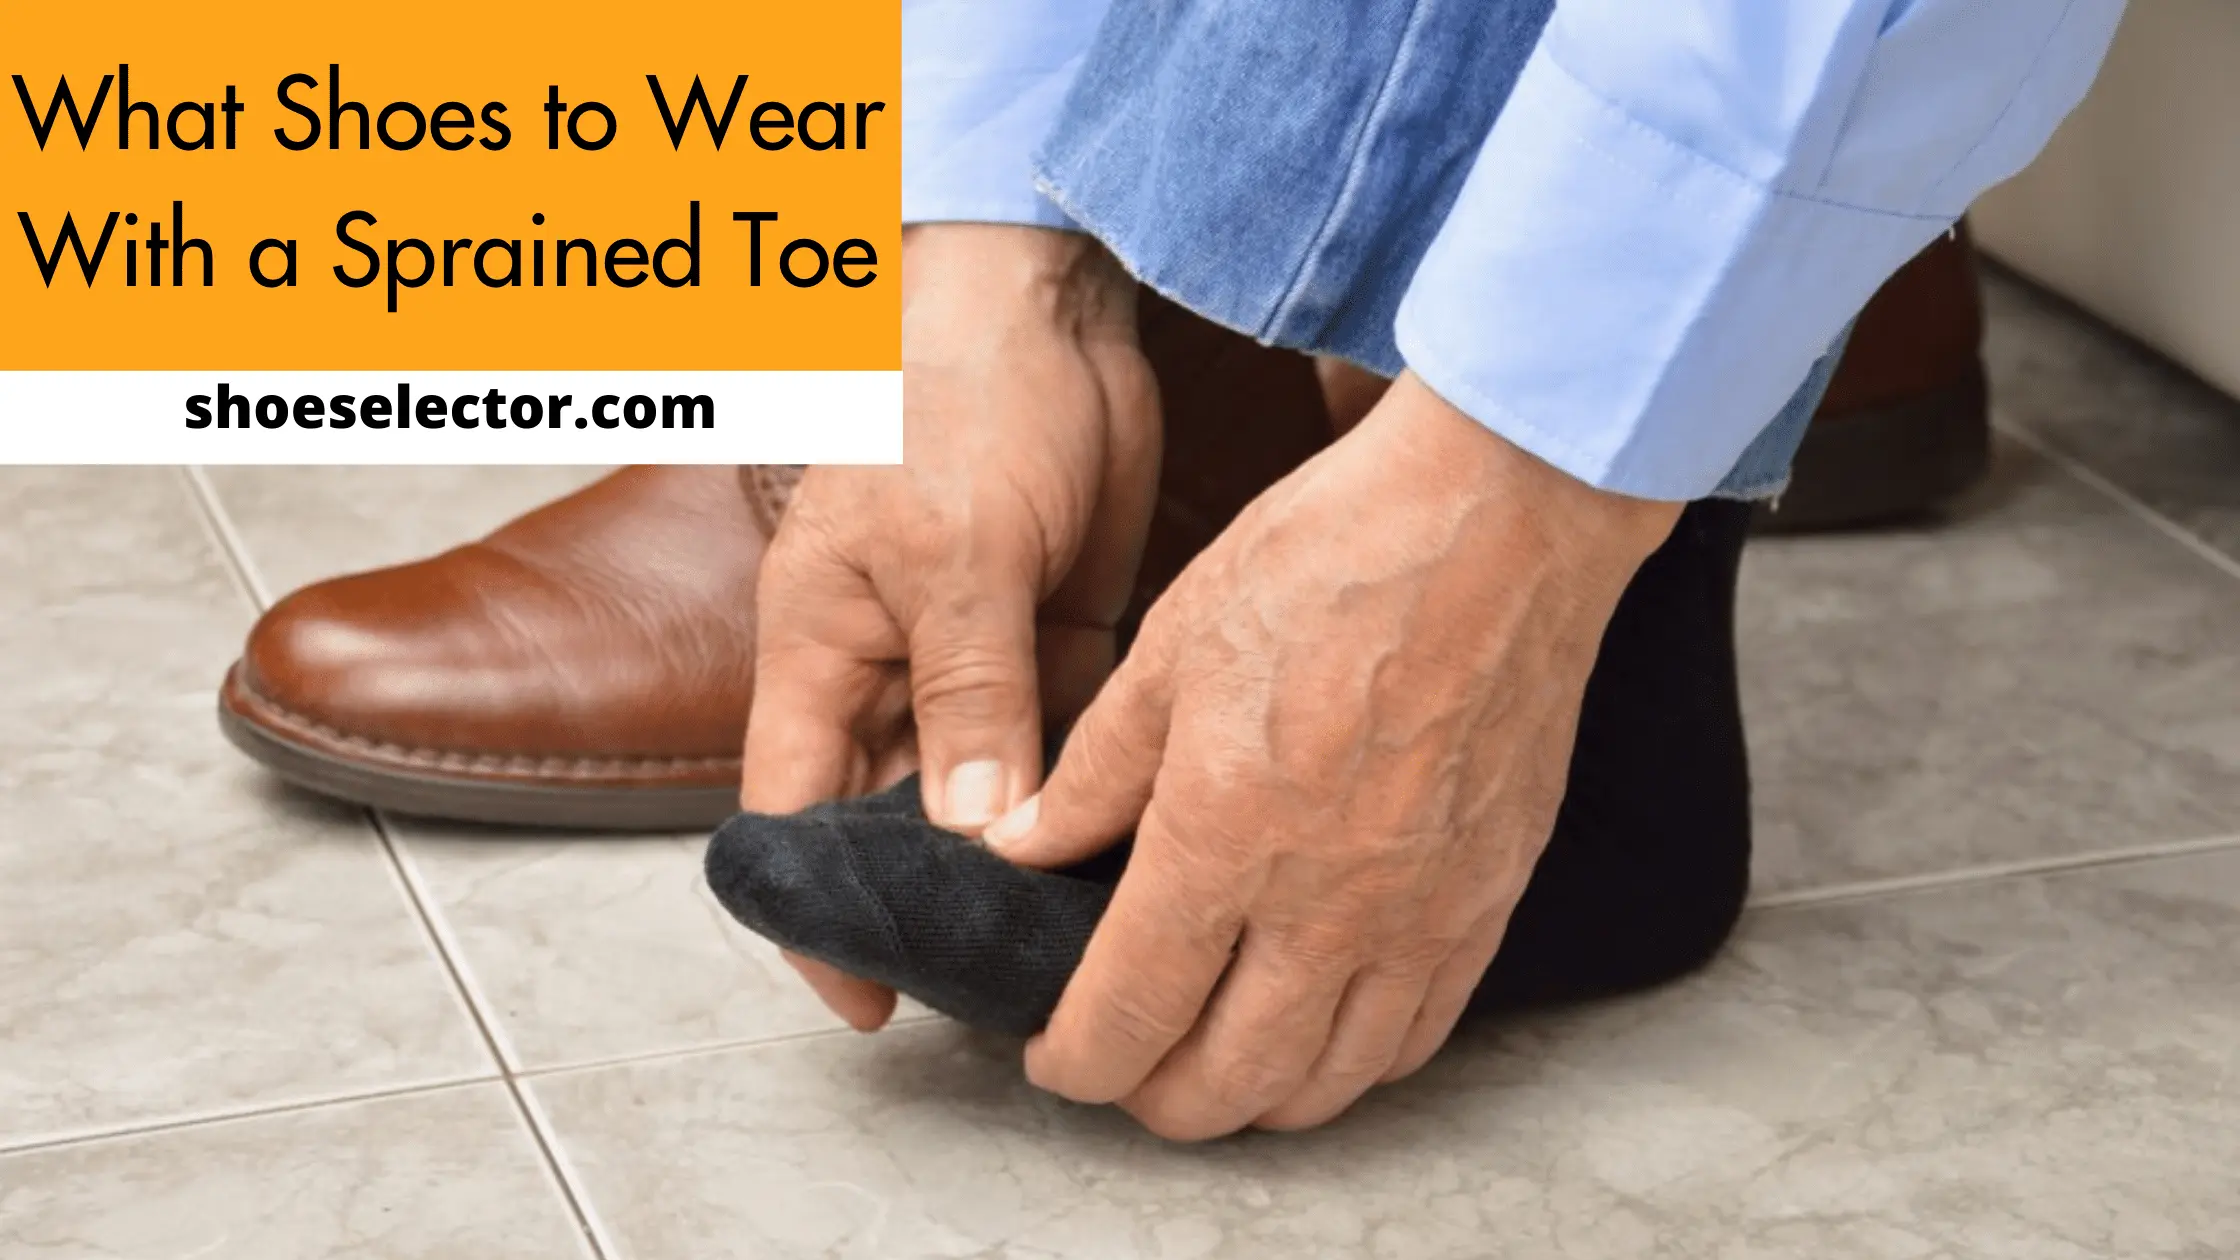 What Shoes to Wear With a Sprained Toe? Complete Guide